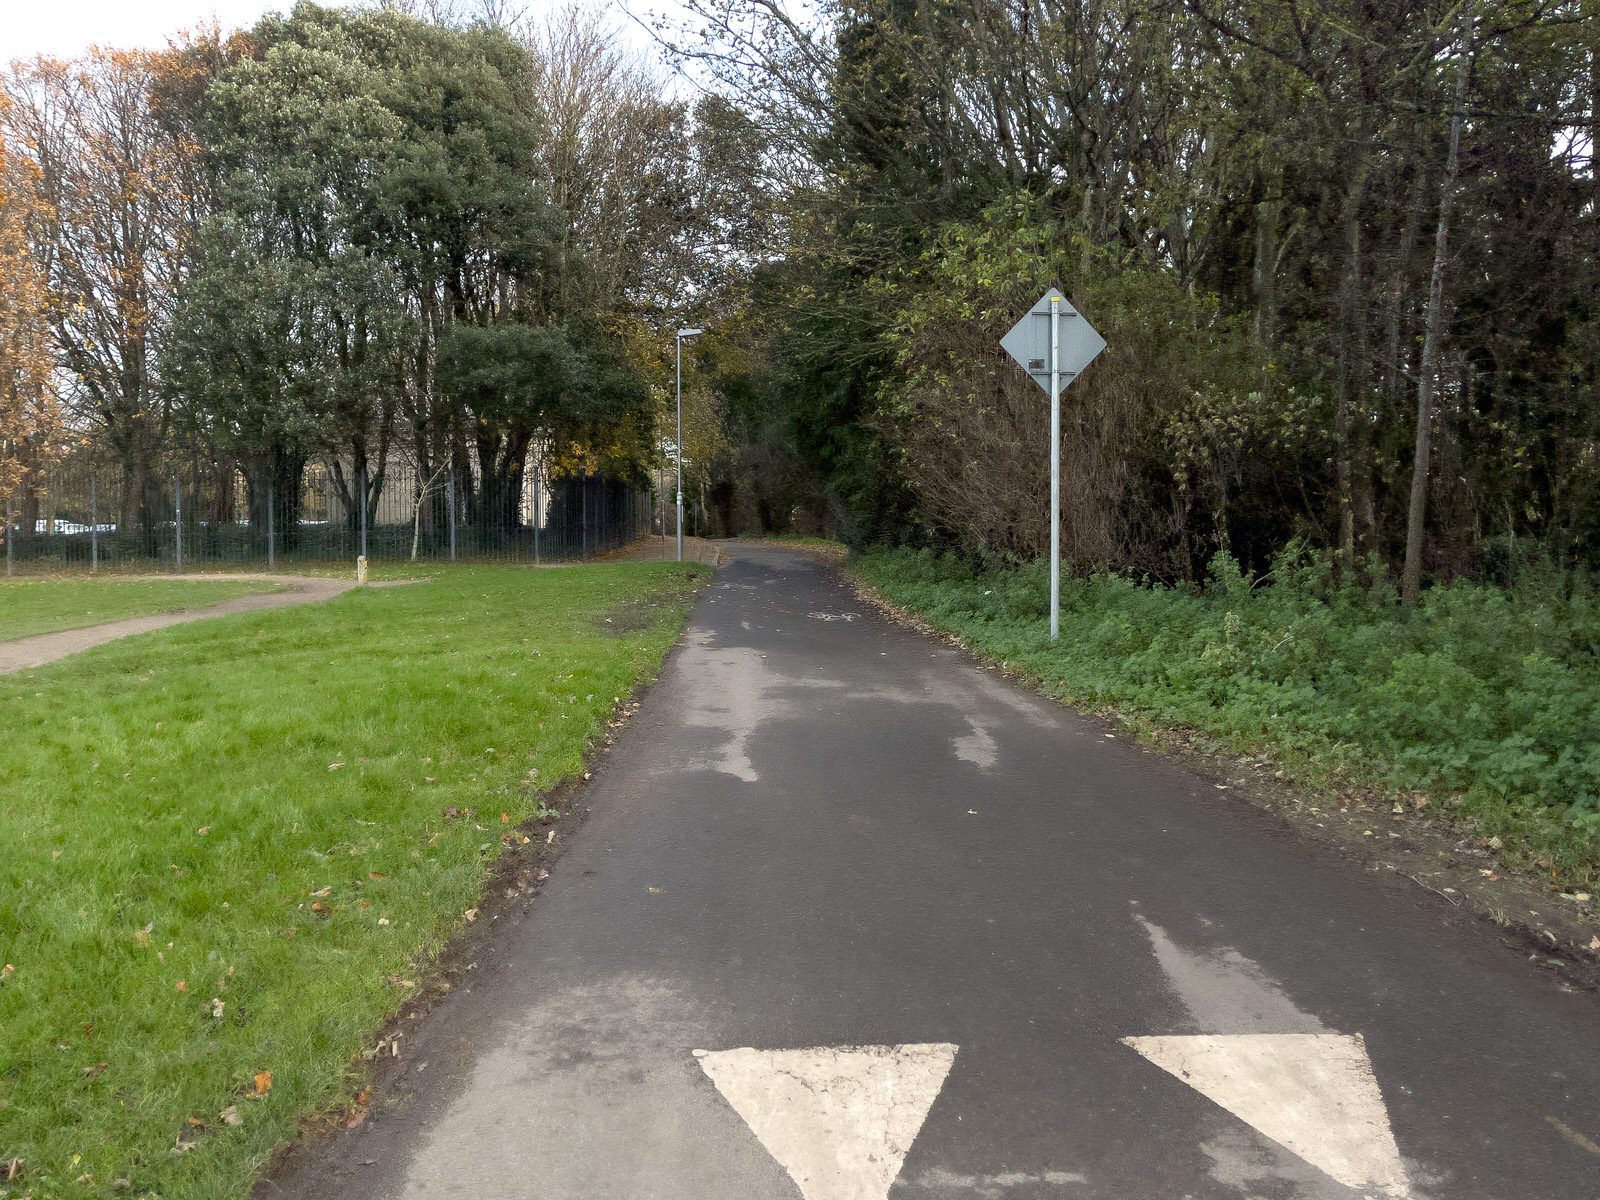 MY FIRST DAY WITHOUT THE 17 BUS SERVICE [WALK FROM S4 BUS STOP IN UCD TO ROEBUCK ROAD]-225581-1